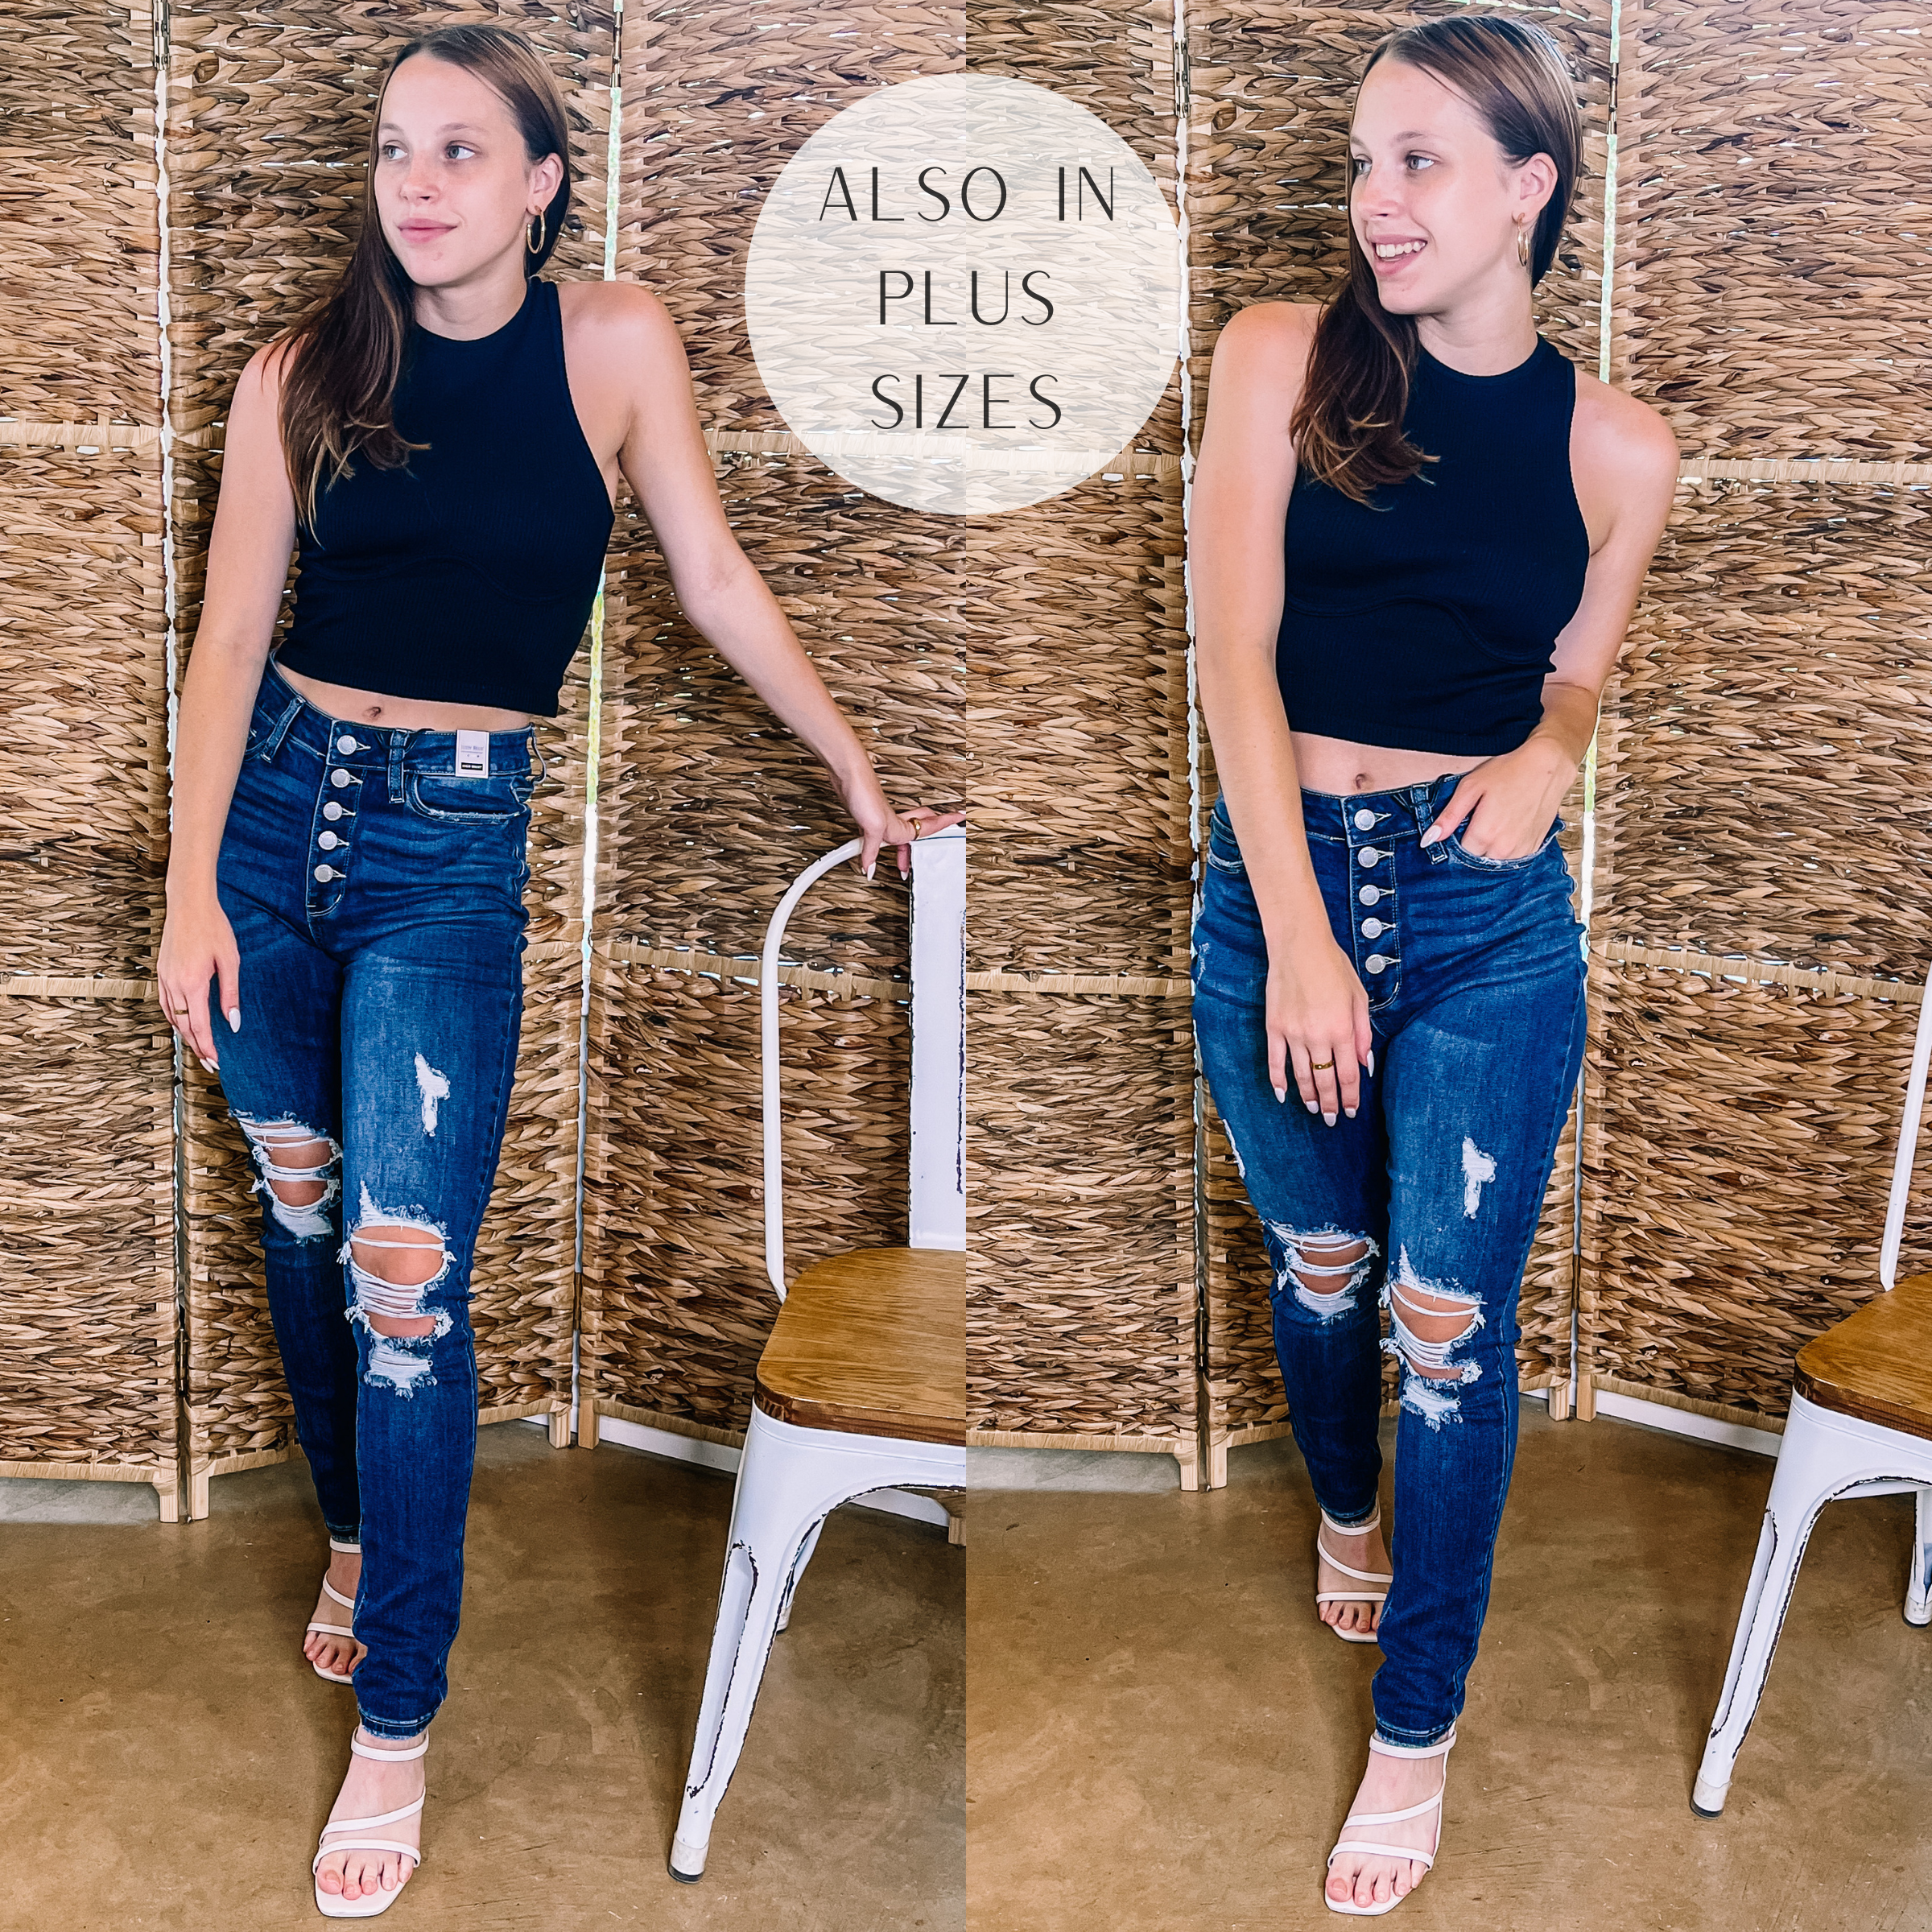 Model is wearing a pair of button fly skinny jeans with distressing on each leg. Model has it paired with a black tank top and white sandals.